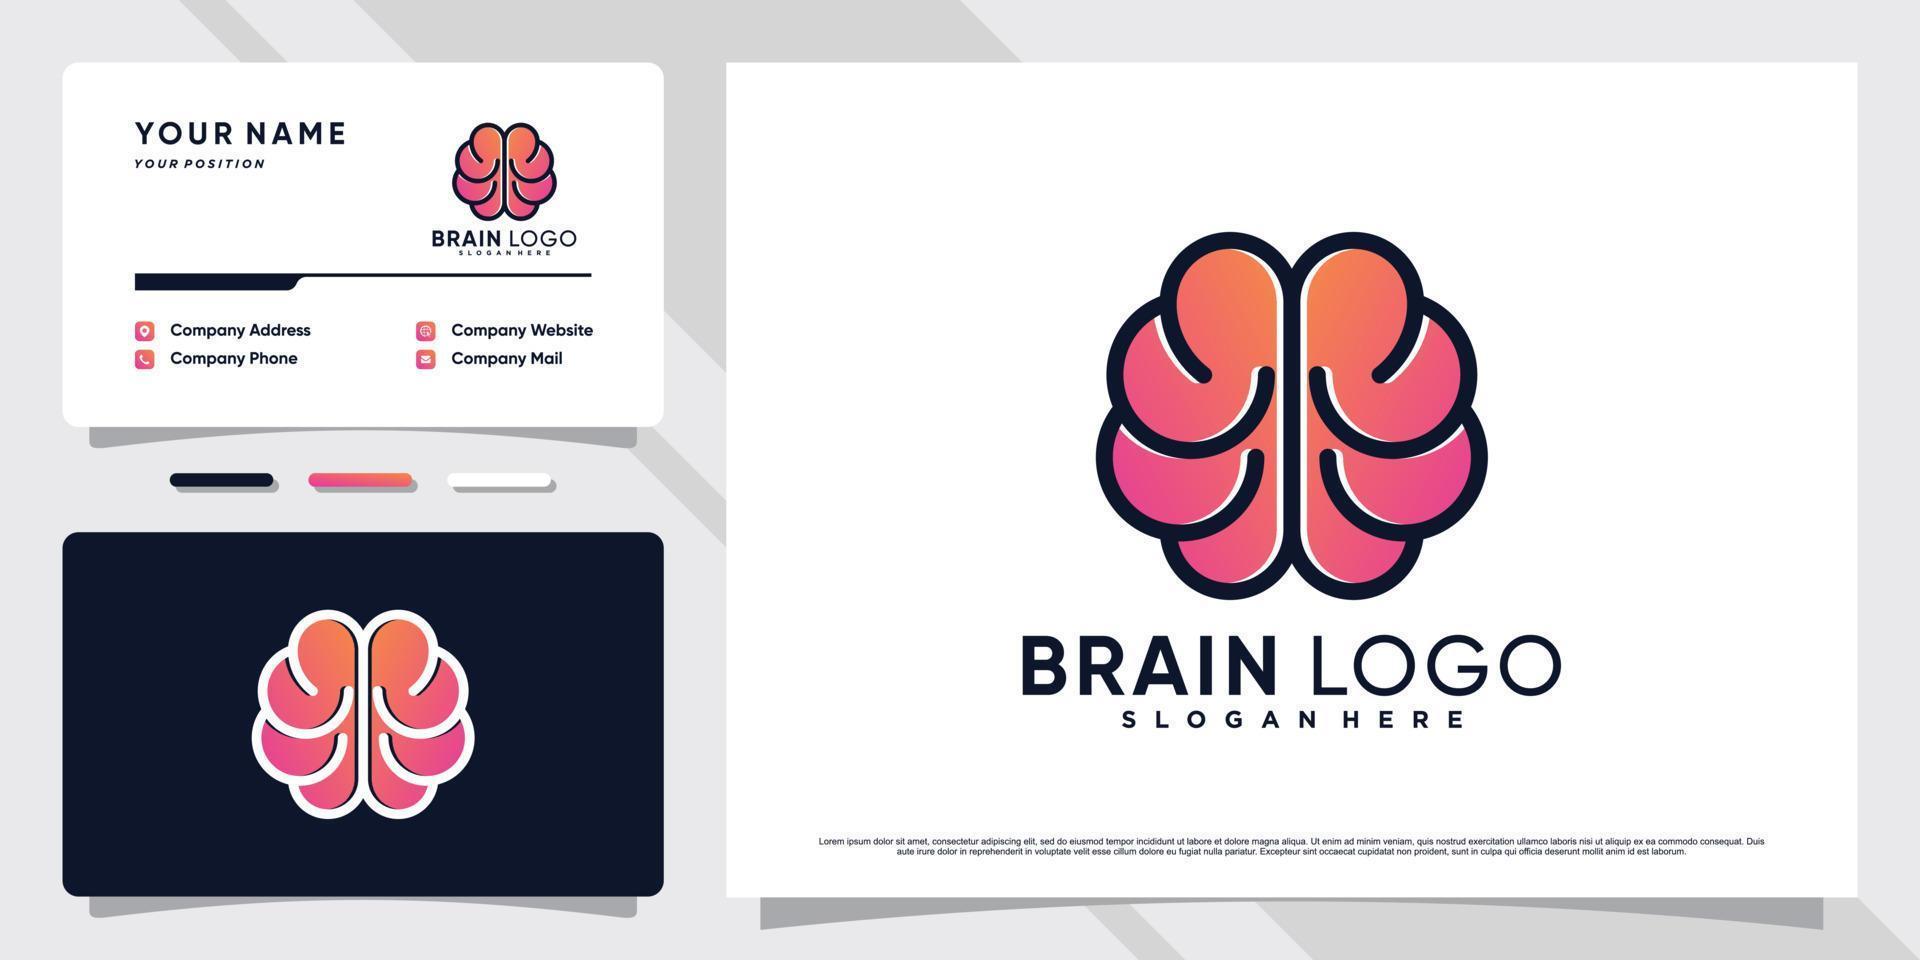 Smart brain technology logo design illustration with simple concept and business card Premium Vector